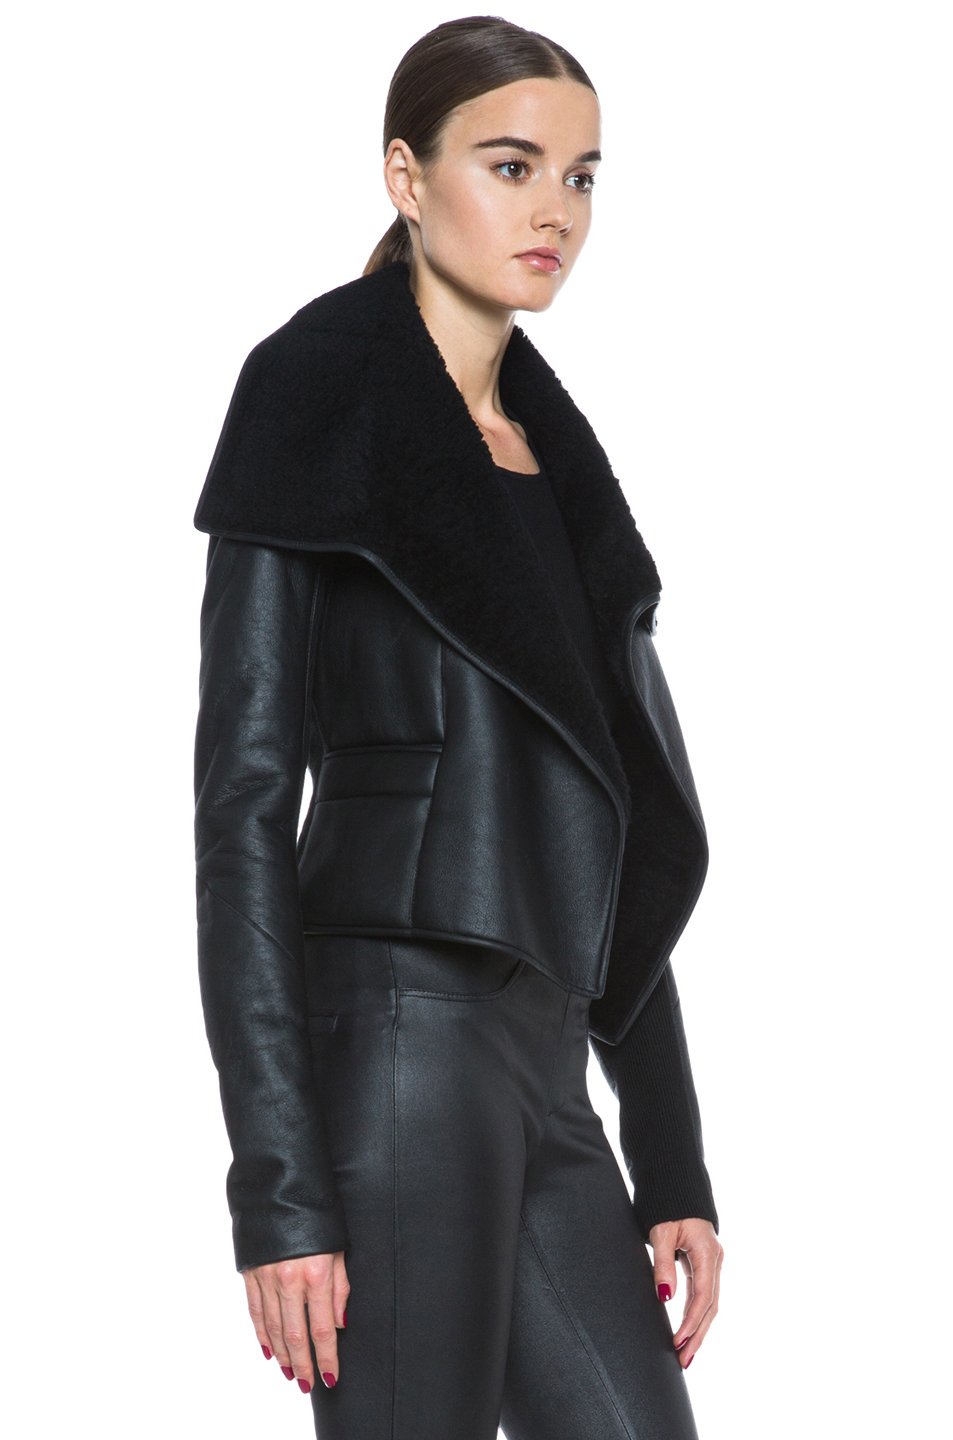 Lyst - Rick Owens Biker Leather and Shearling Jacket in Black